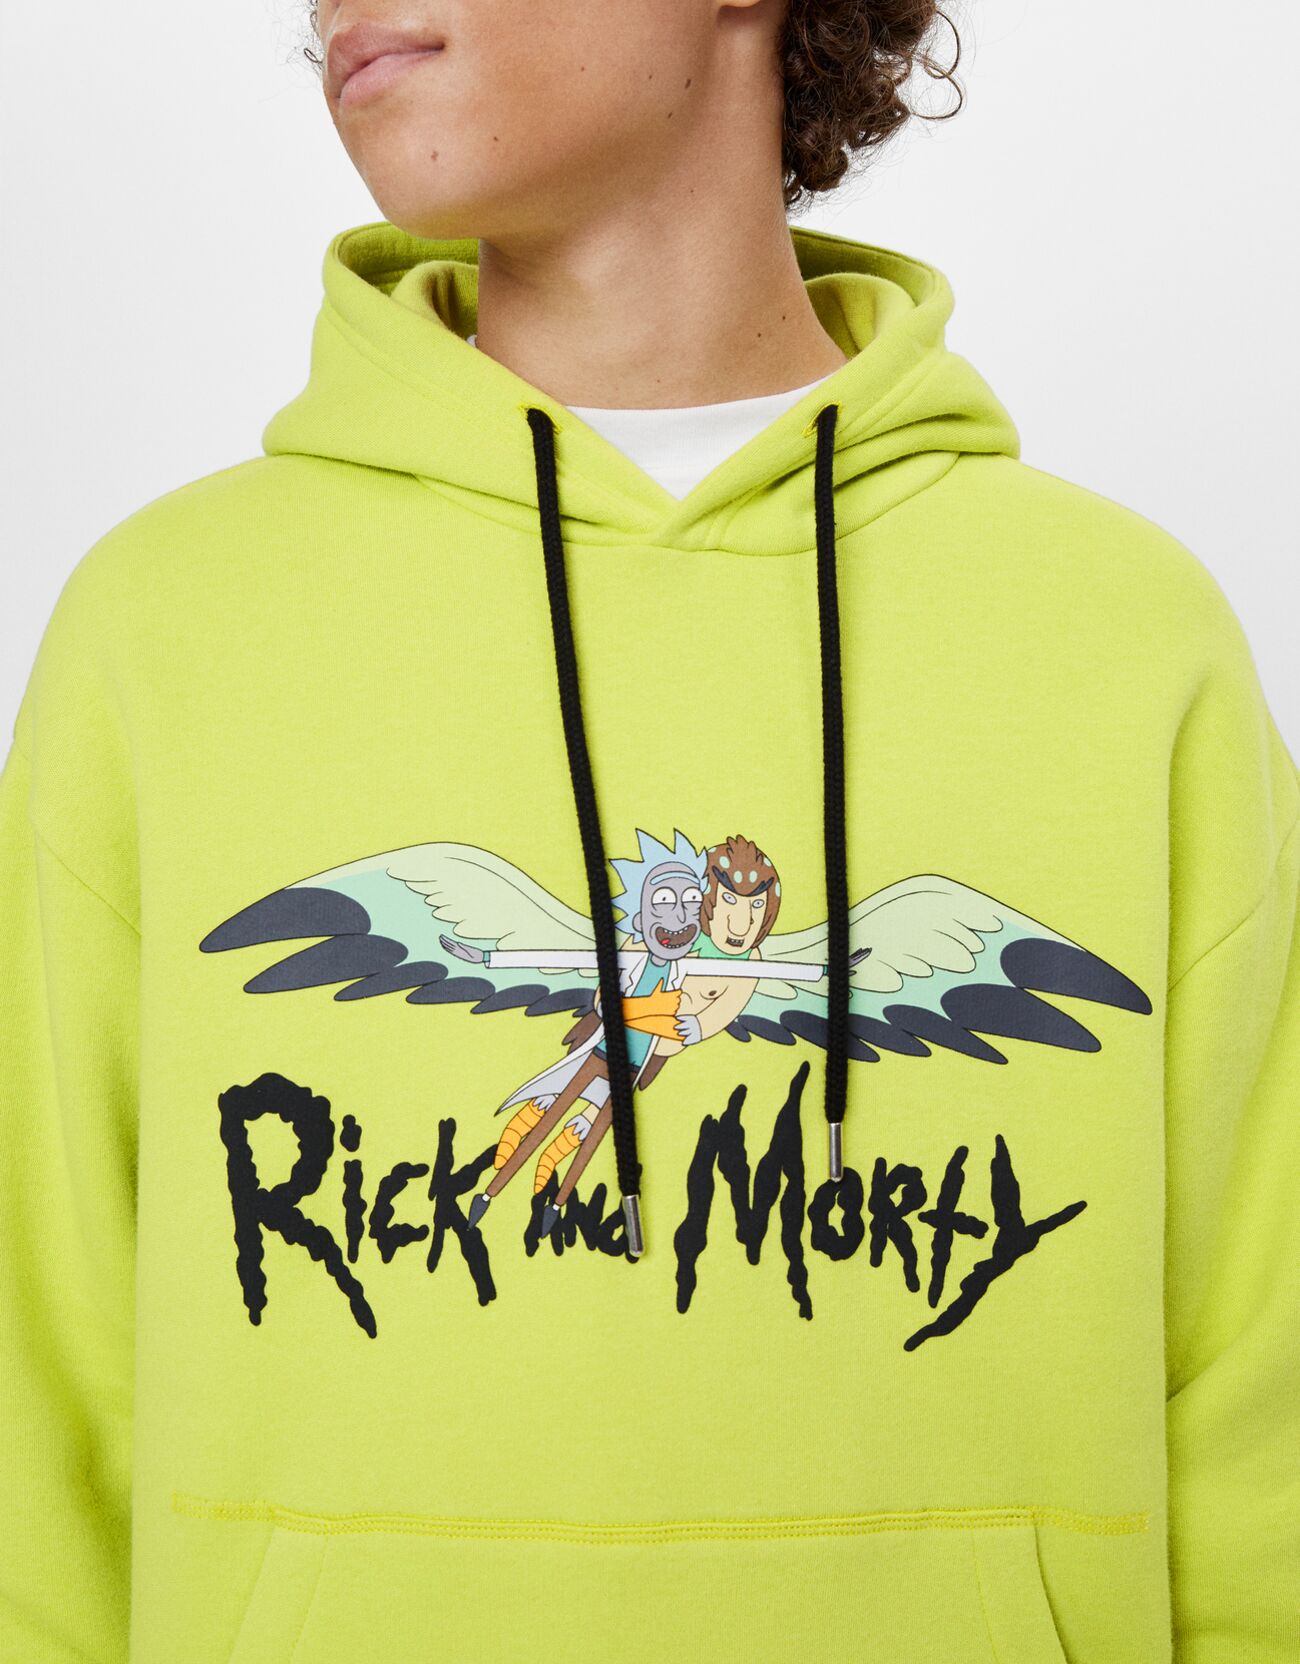 rick and morty - Twilight Merch